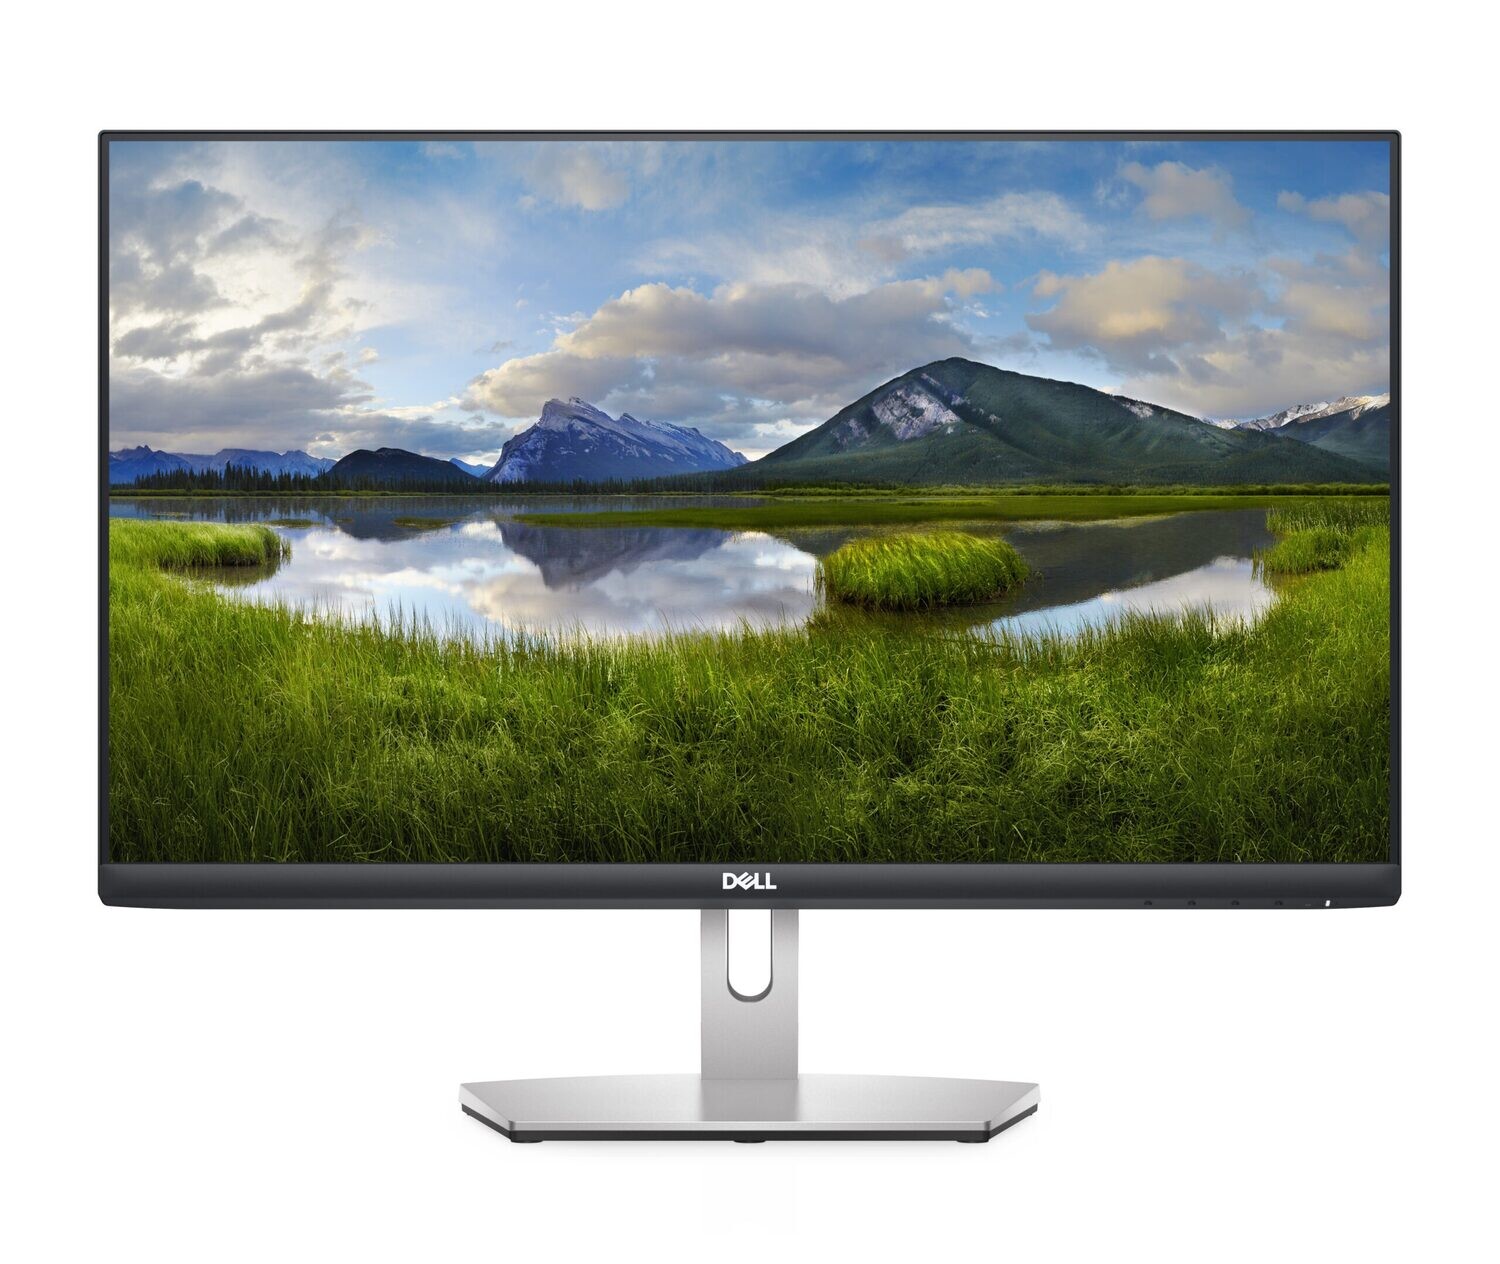 Monitor DELL S-series S2421HN 23.8in, 1920x1080, FHD, IPS Antiglare, 16:9, 1000:1, 250 cd/m2, AMD FreeSync, 4ms, 178/178, 2x HDMI, Audio line out, Tilt, 3Y